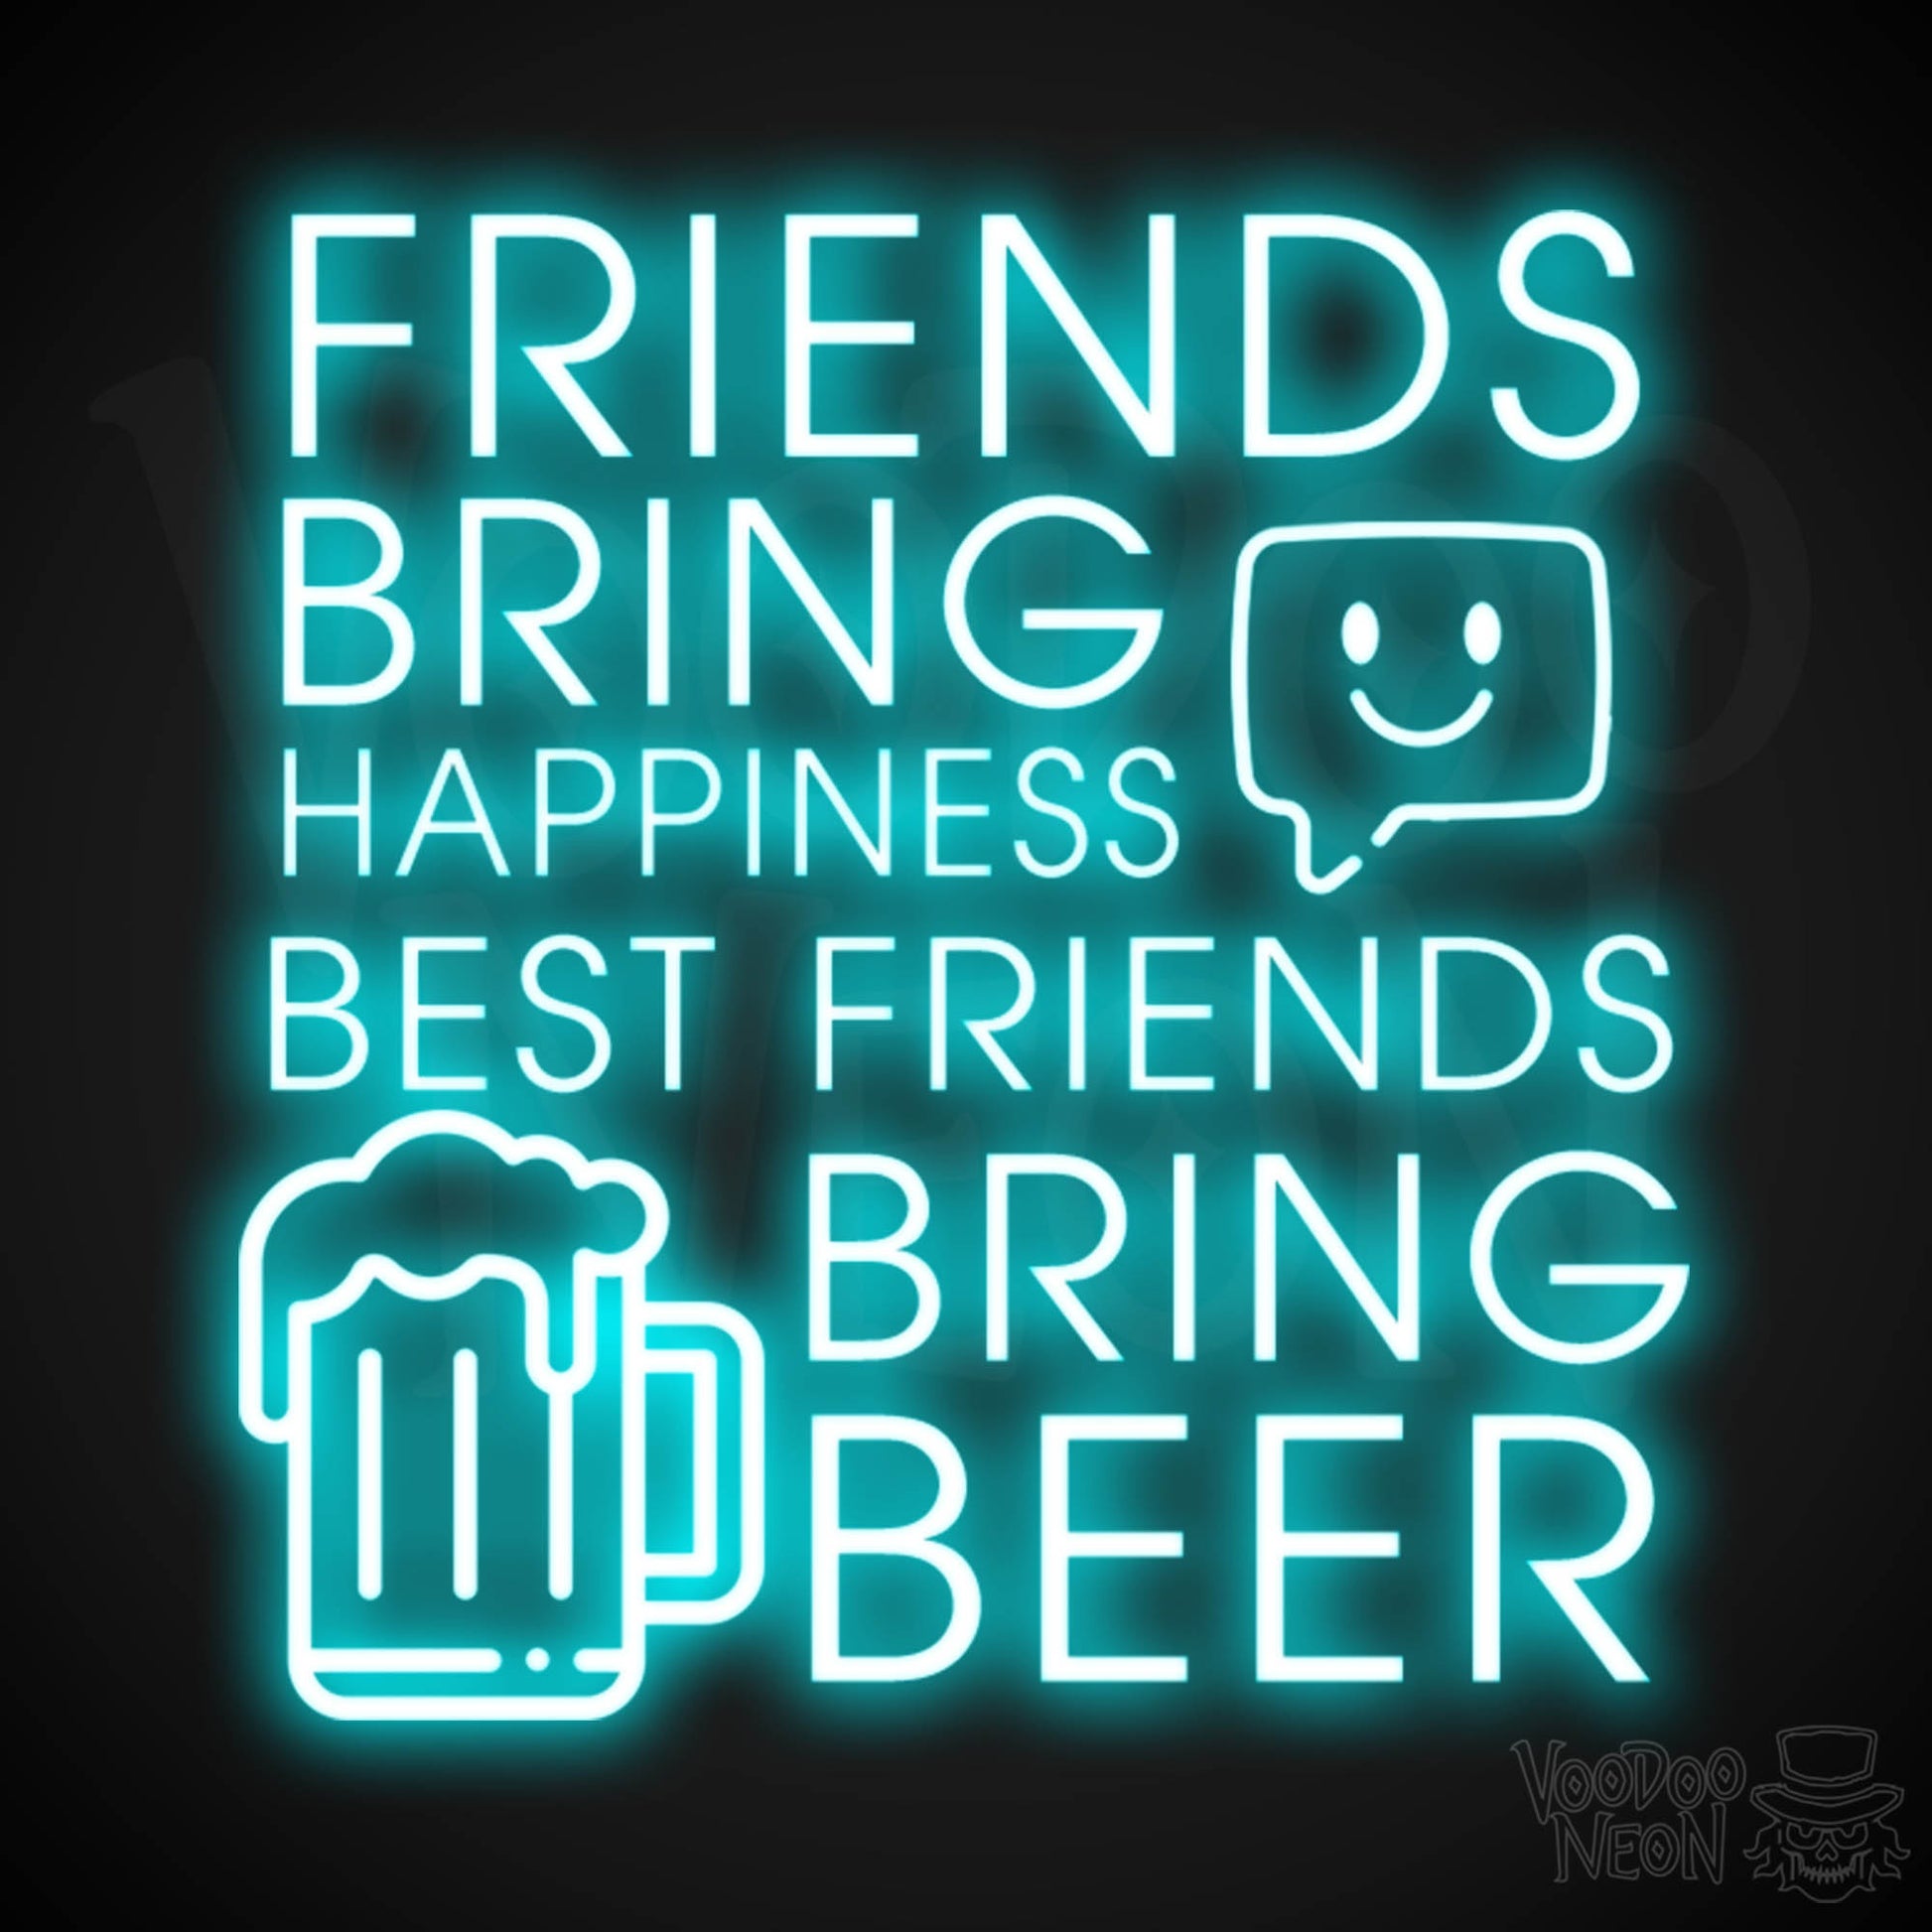 Friends Bring Happiness Best Friends Bring Beer Neon Sign - LED Lights Wall Art - Color Ice Blue